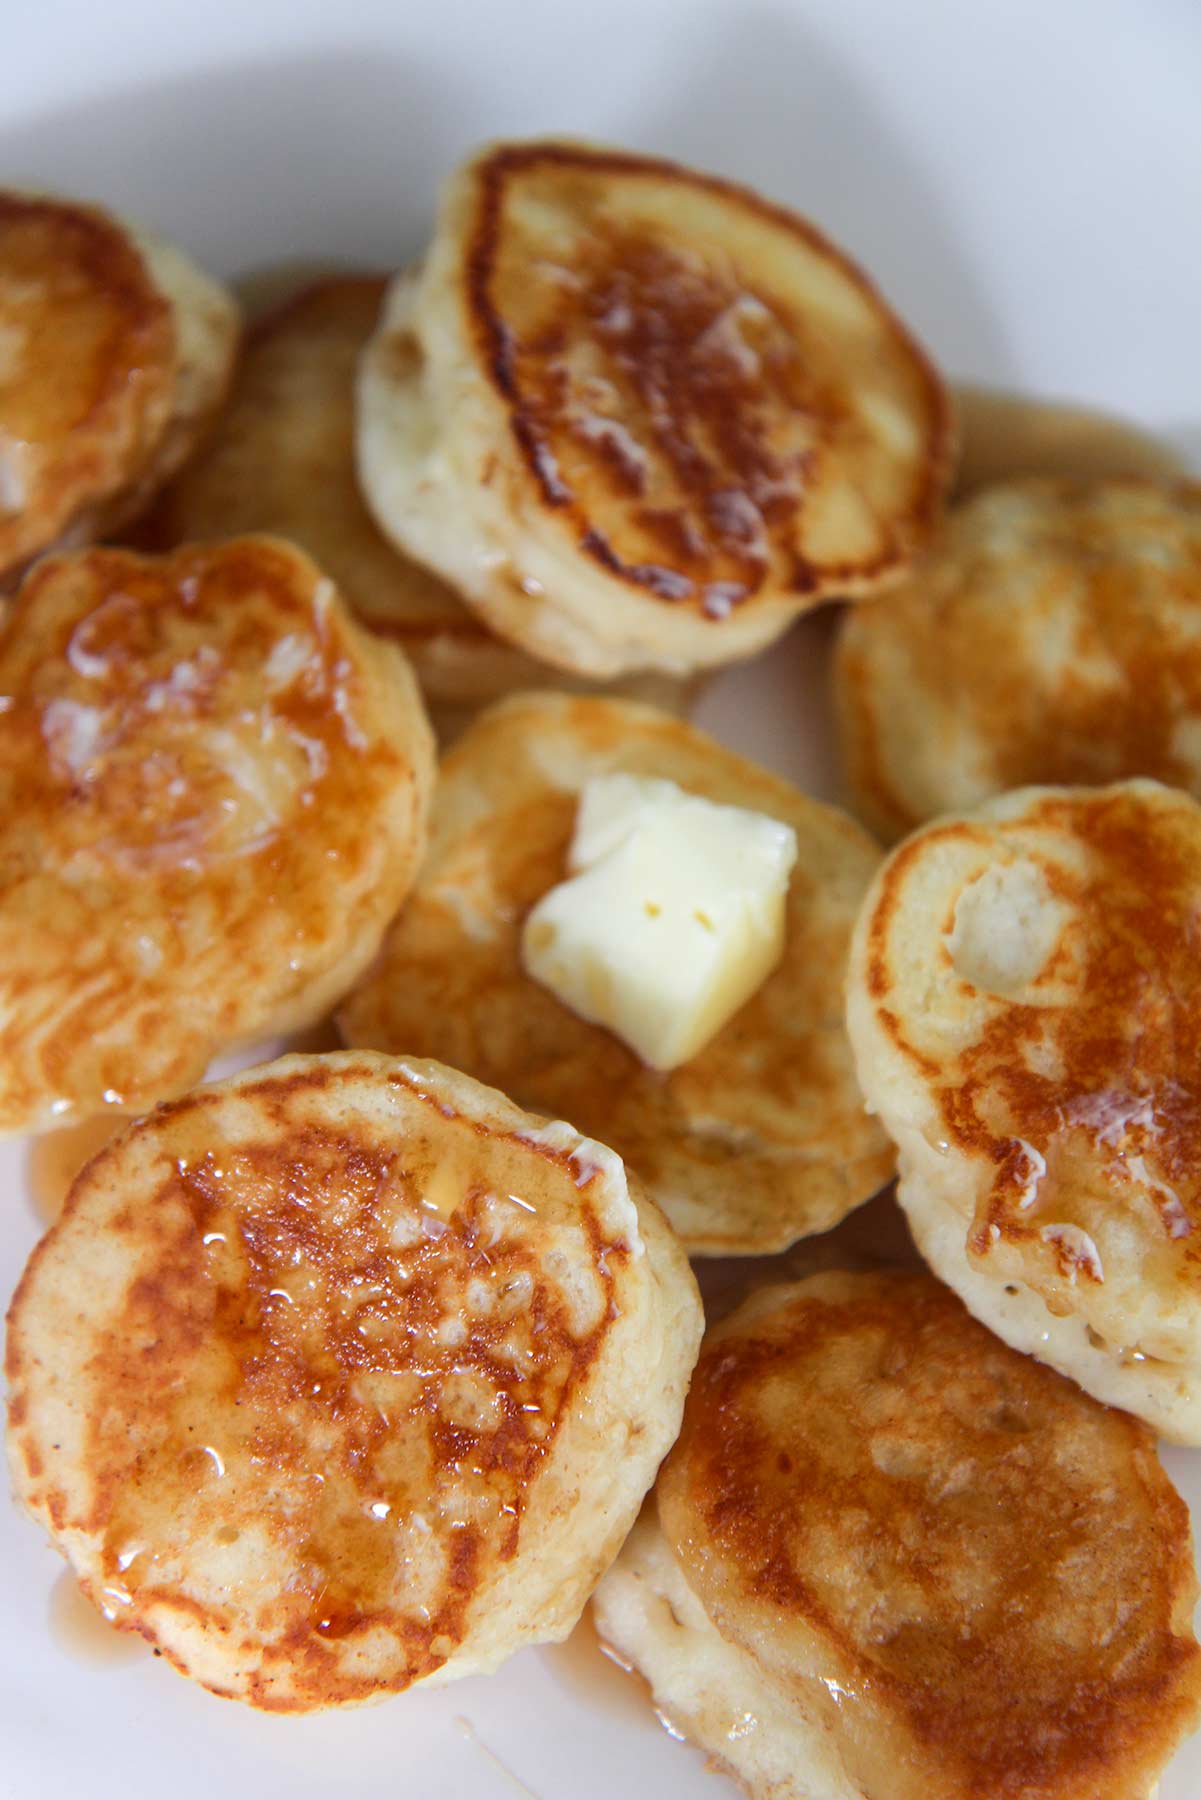 Mini Pancakes (Silver Dollar Pancakes) - All You Need is Brunch